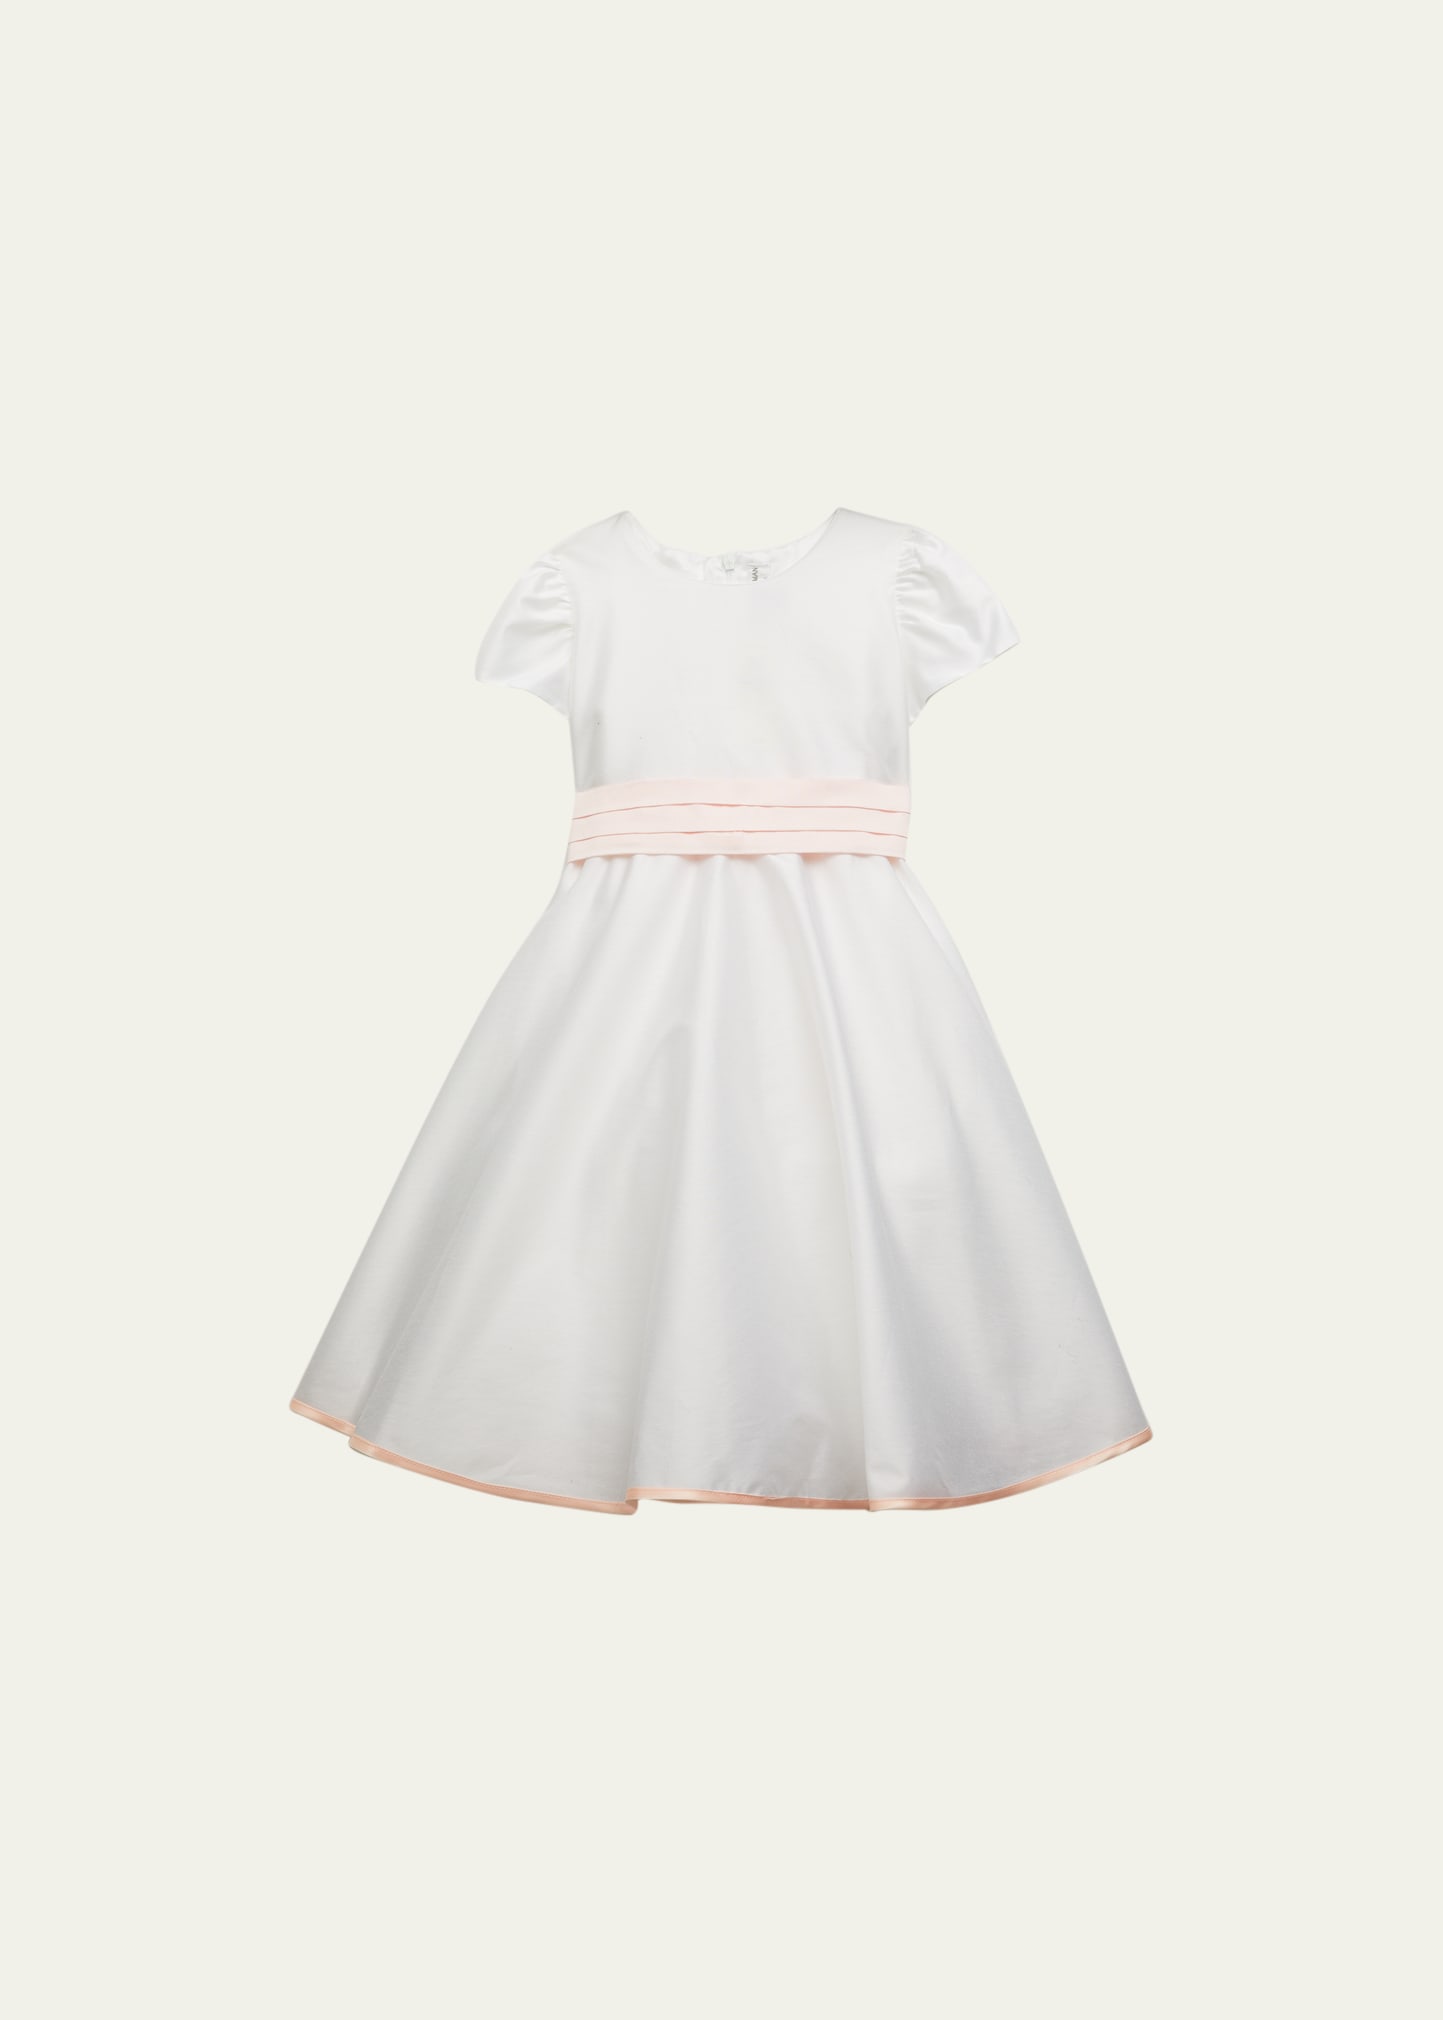 Mariella Ferrari Kids' Girl's A-line Dress With Bow In Pink